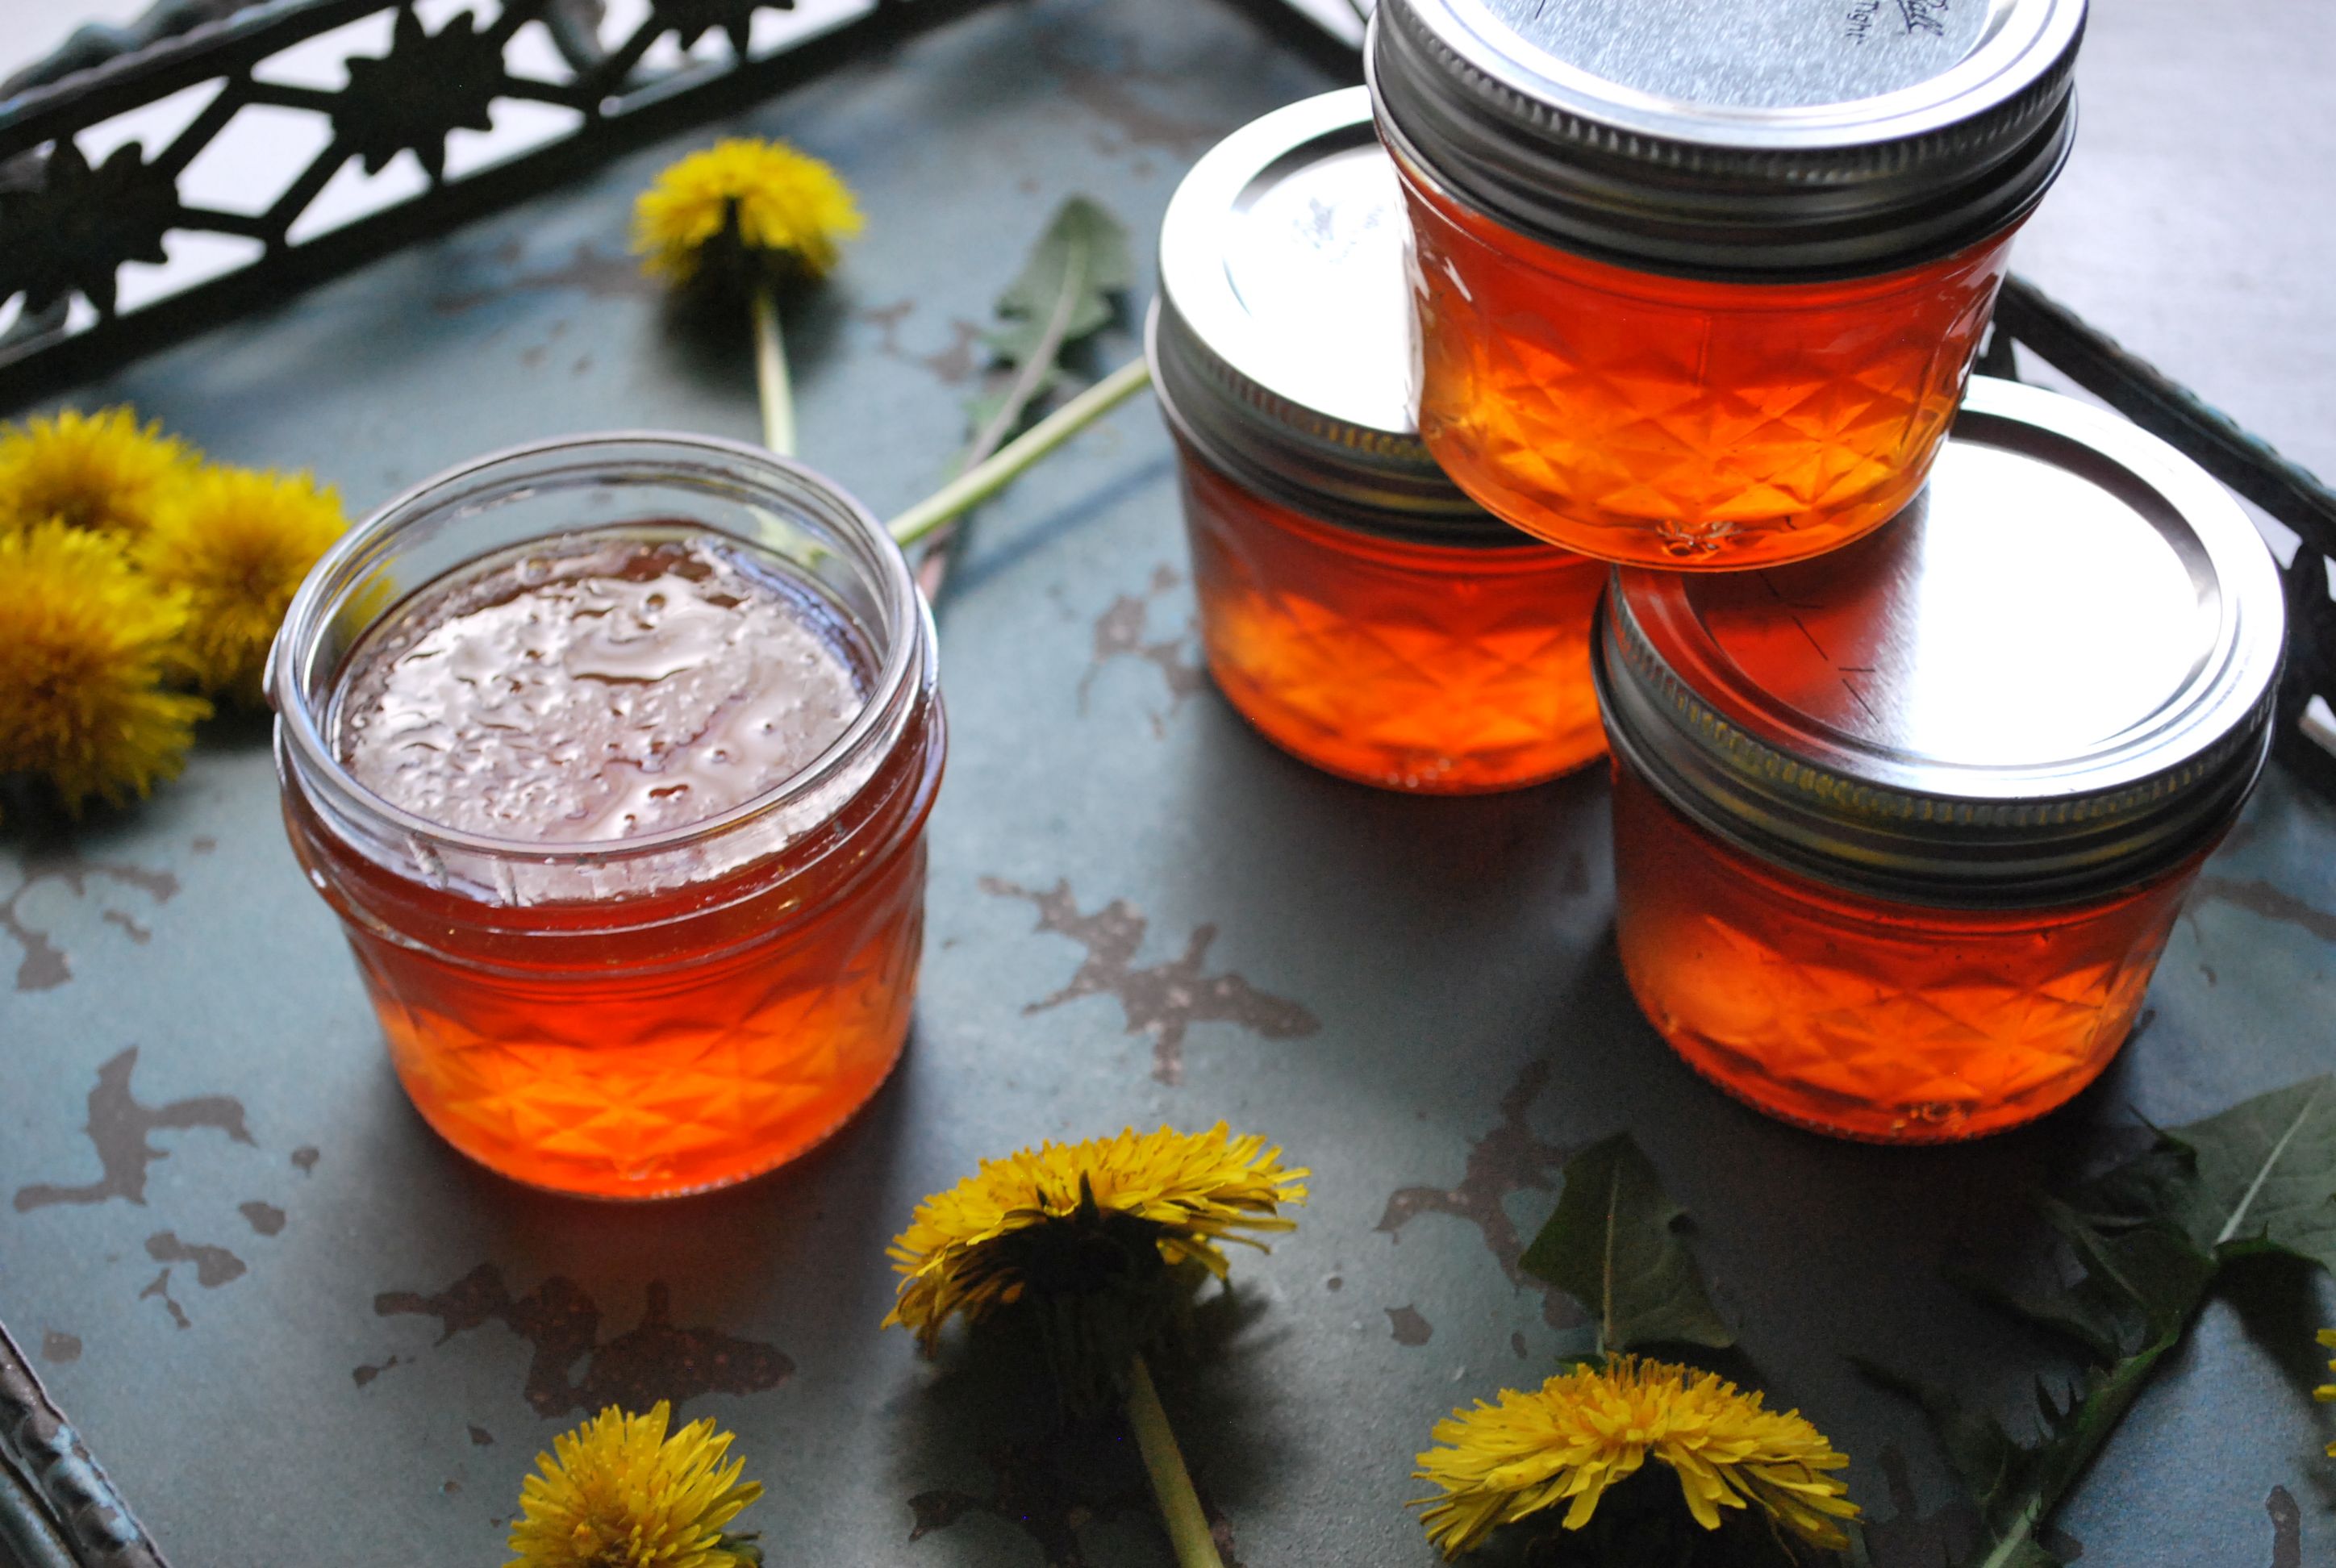 Celebrate spring with homemade dandelion jelly